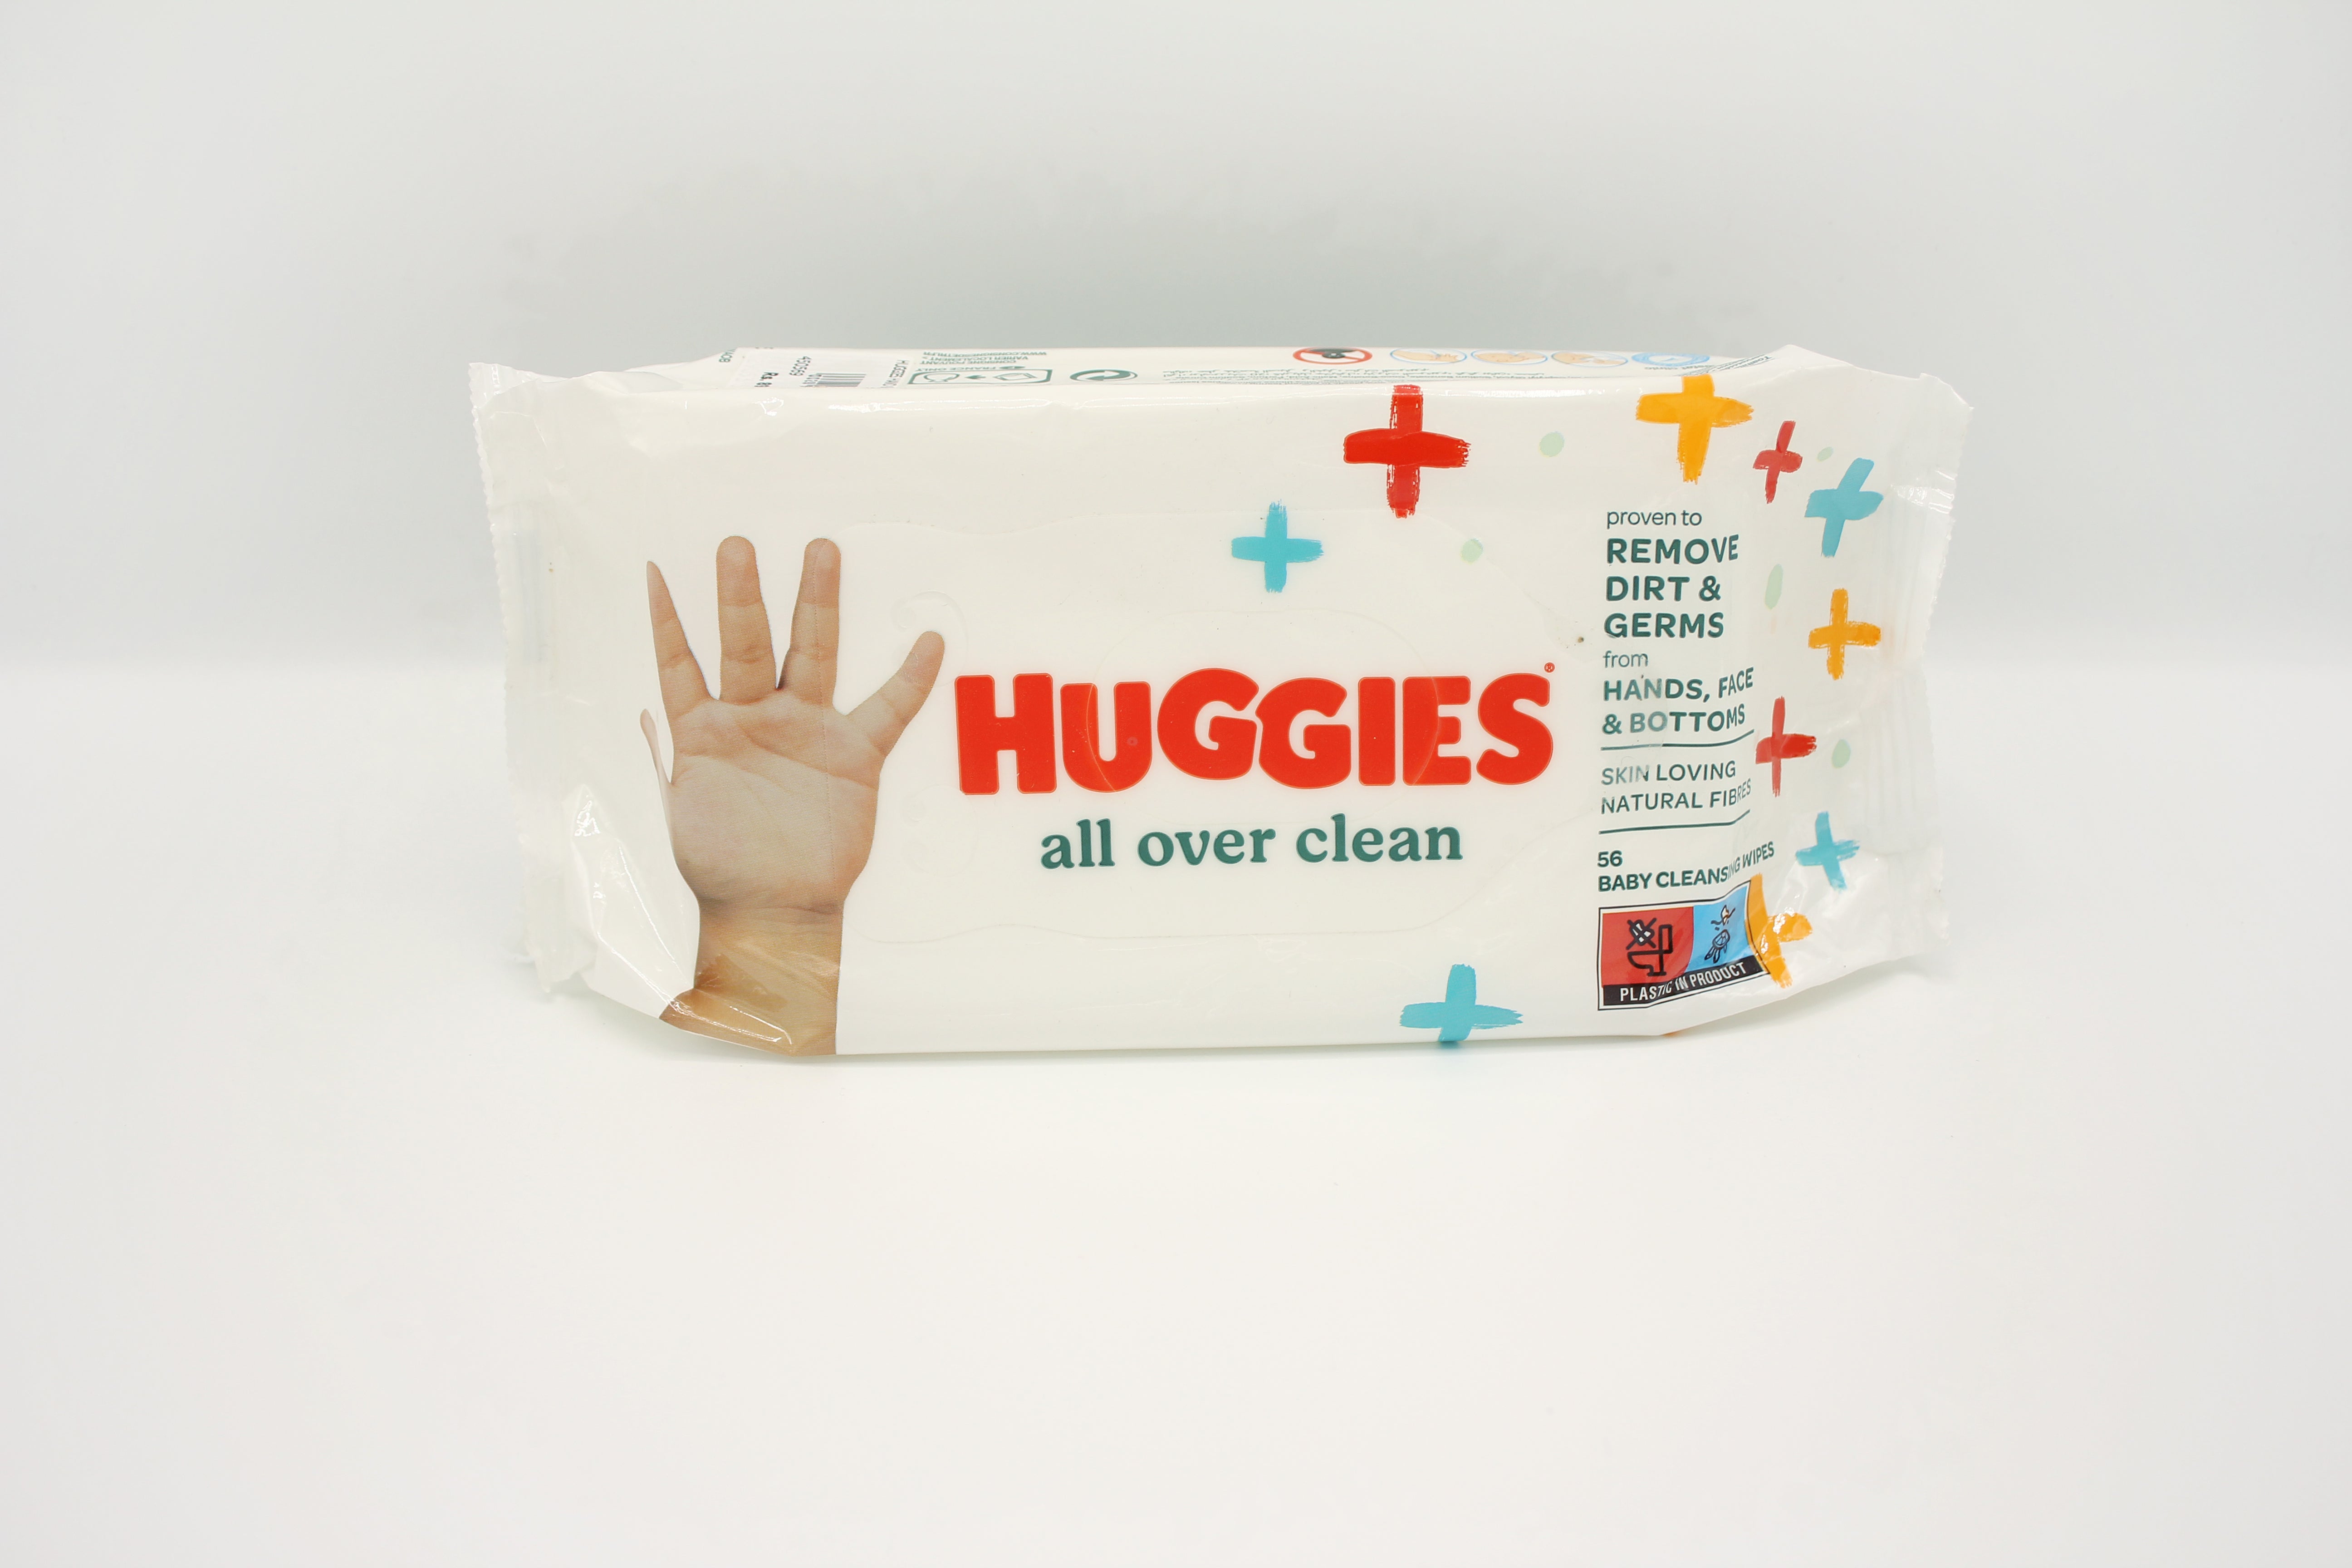 HUGGIES HAND & FACE WIPES - 28979